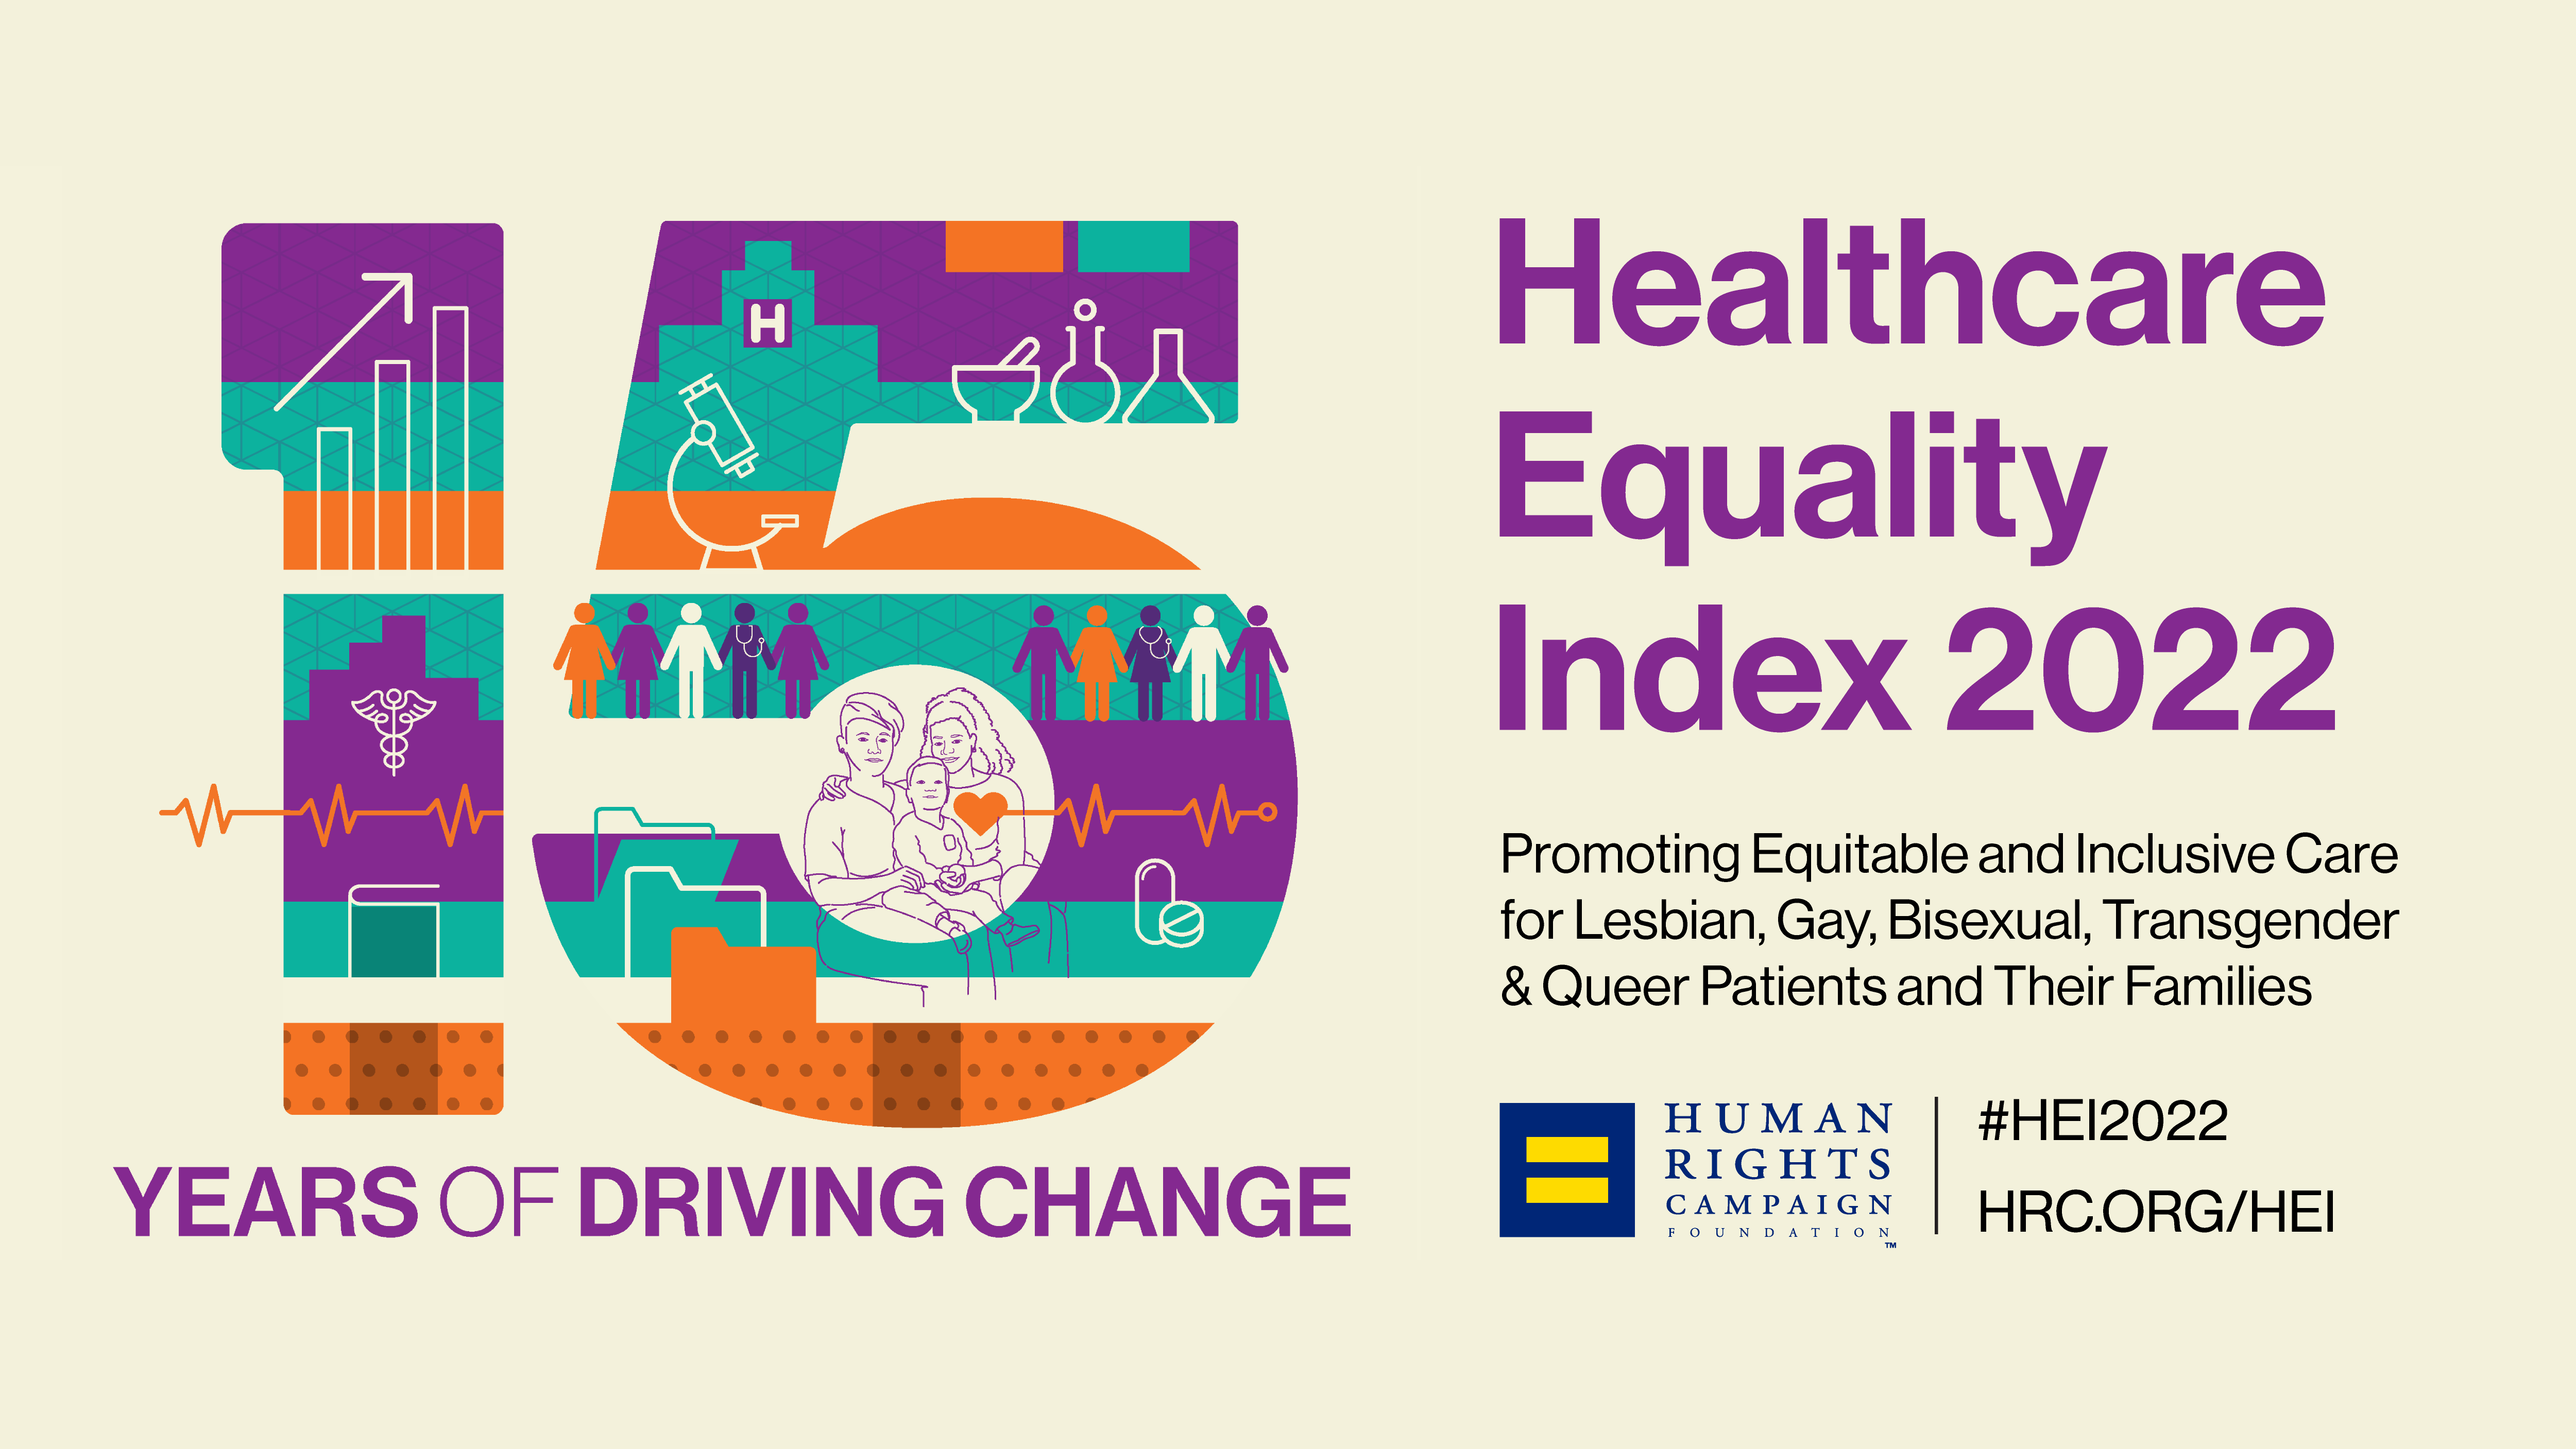 Healthcare Equality Index 2022 Report